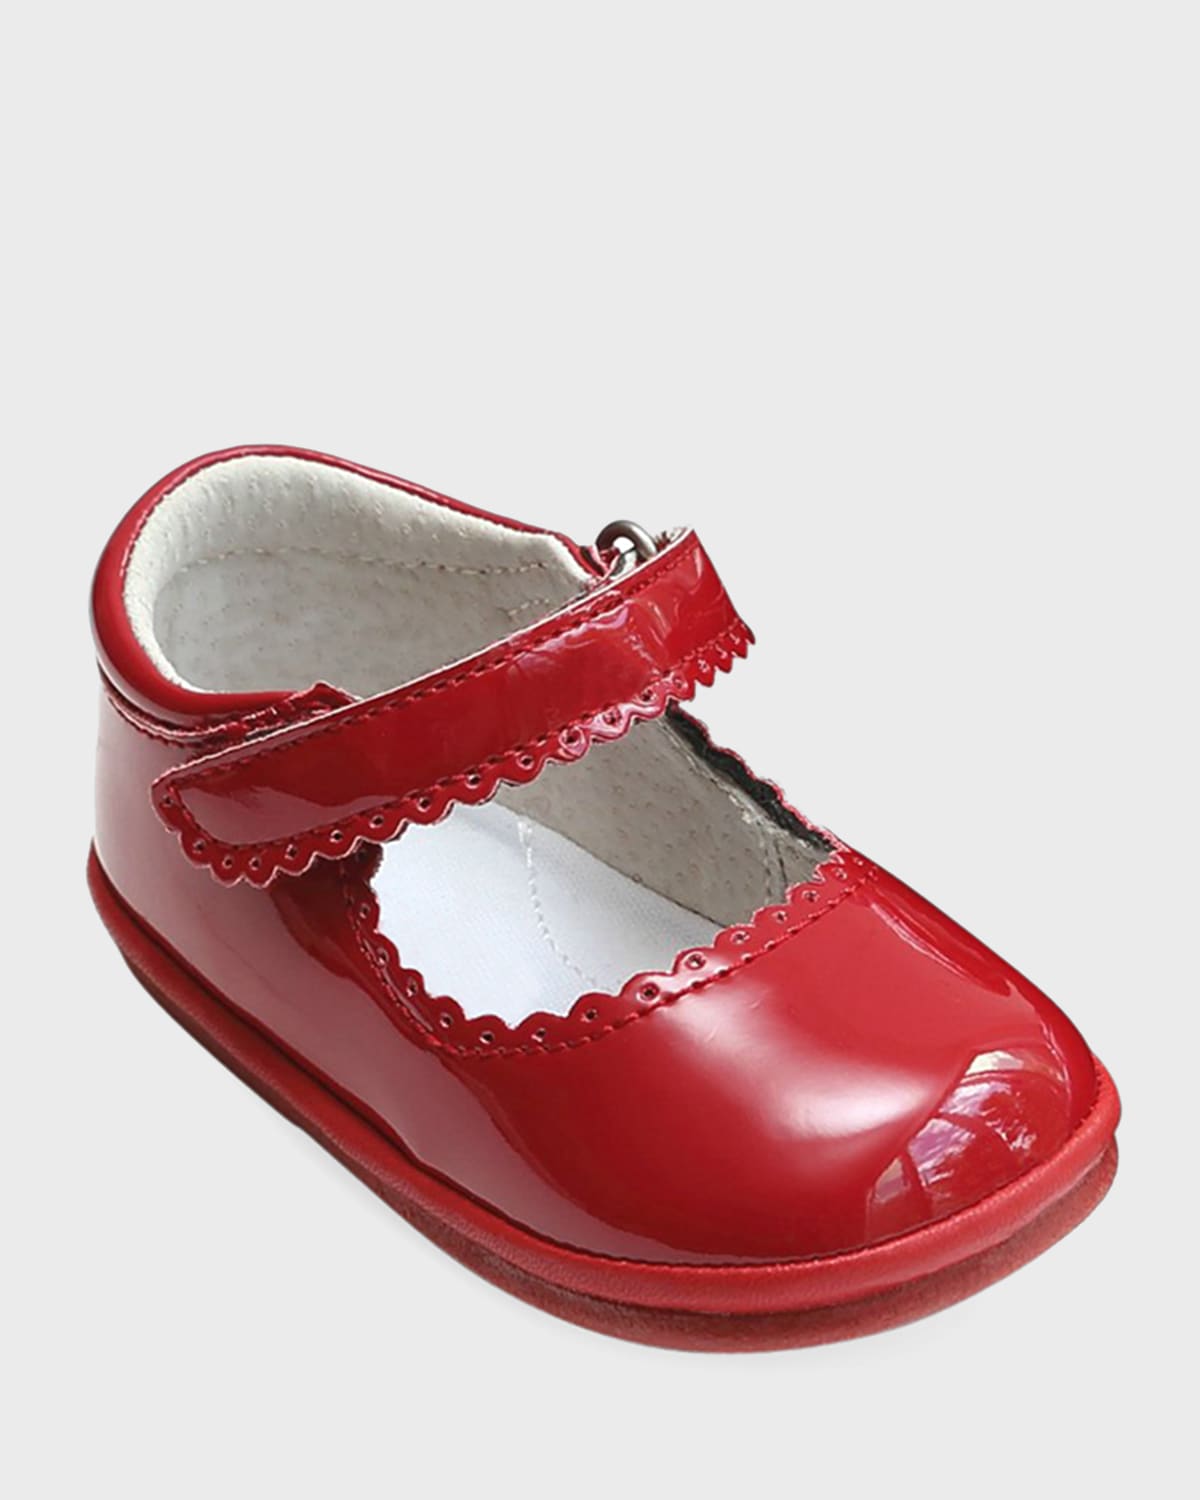 L'amour Shoes Girl's Cara Scalloped Metallic Leather Mary Jane, Baby In Red